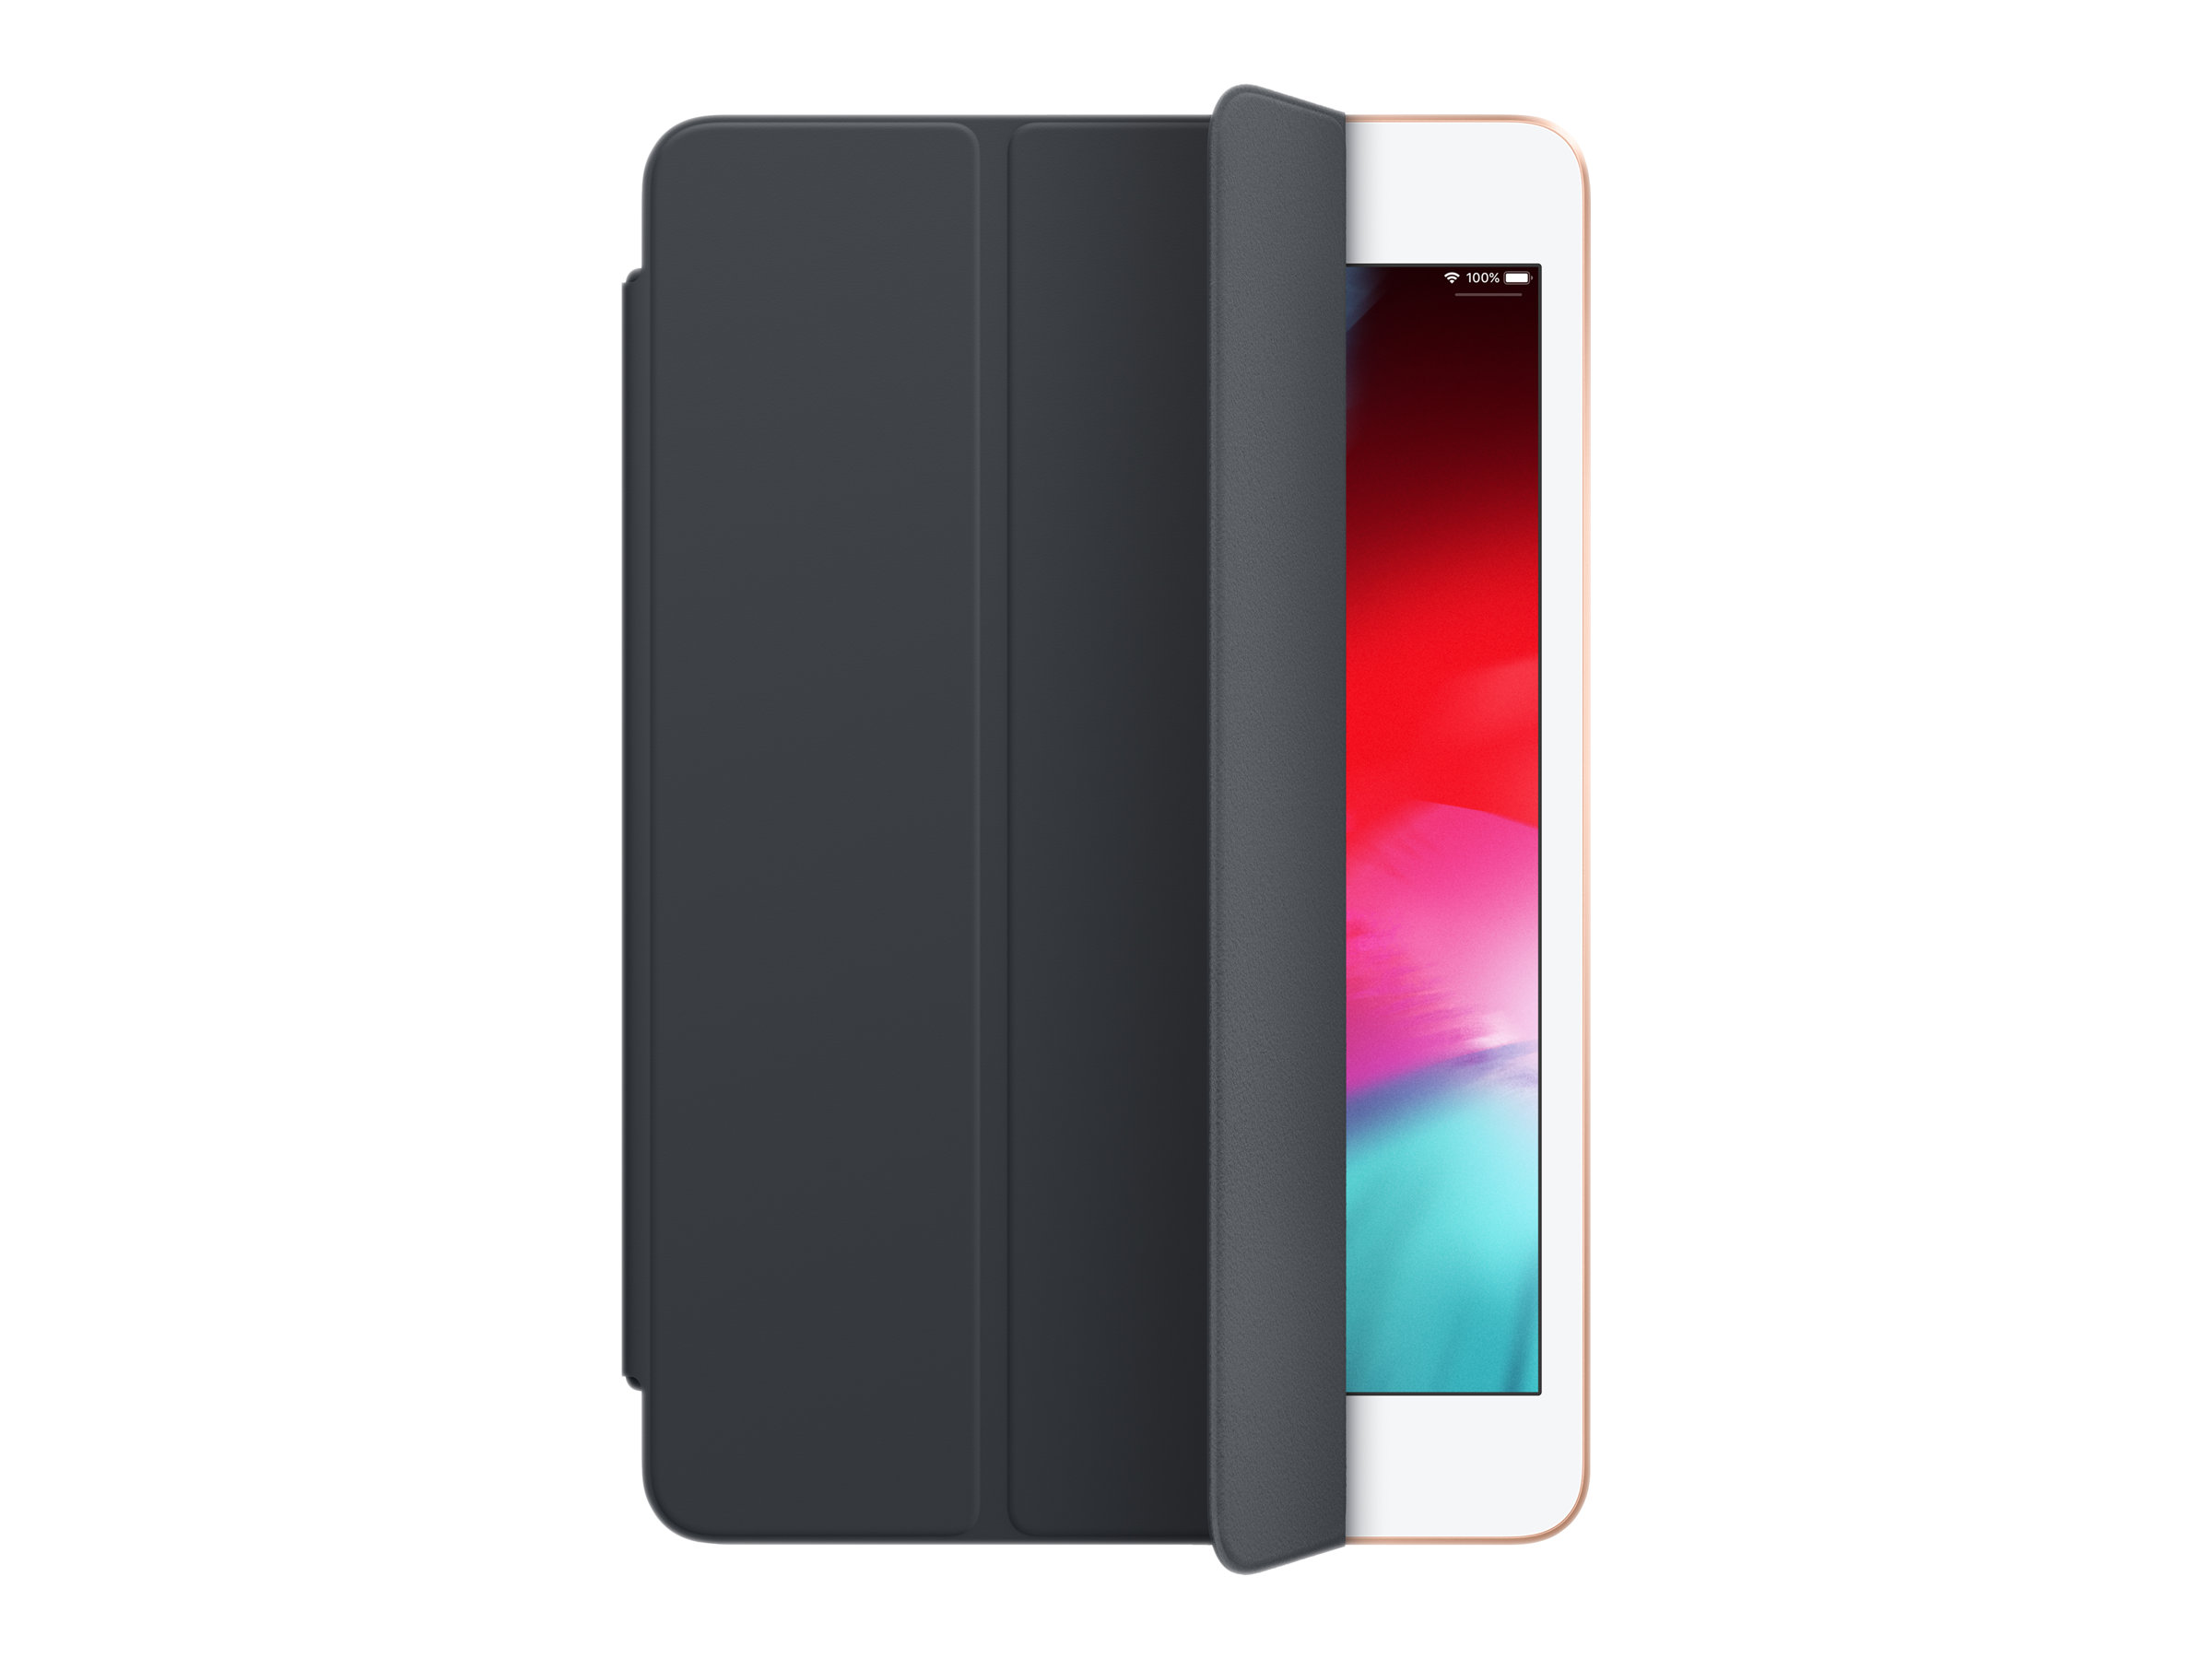 Apple Smart Cover for iPad mini 4 and 5th Generation - image 2 of 4